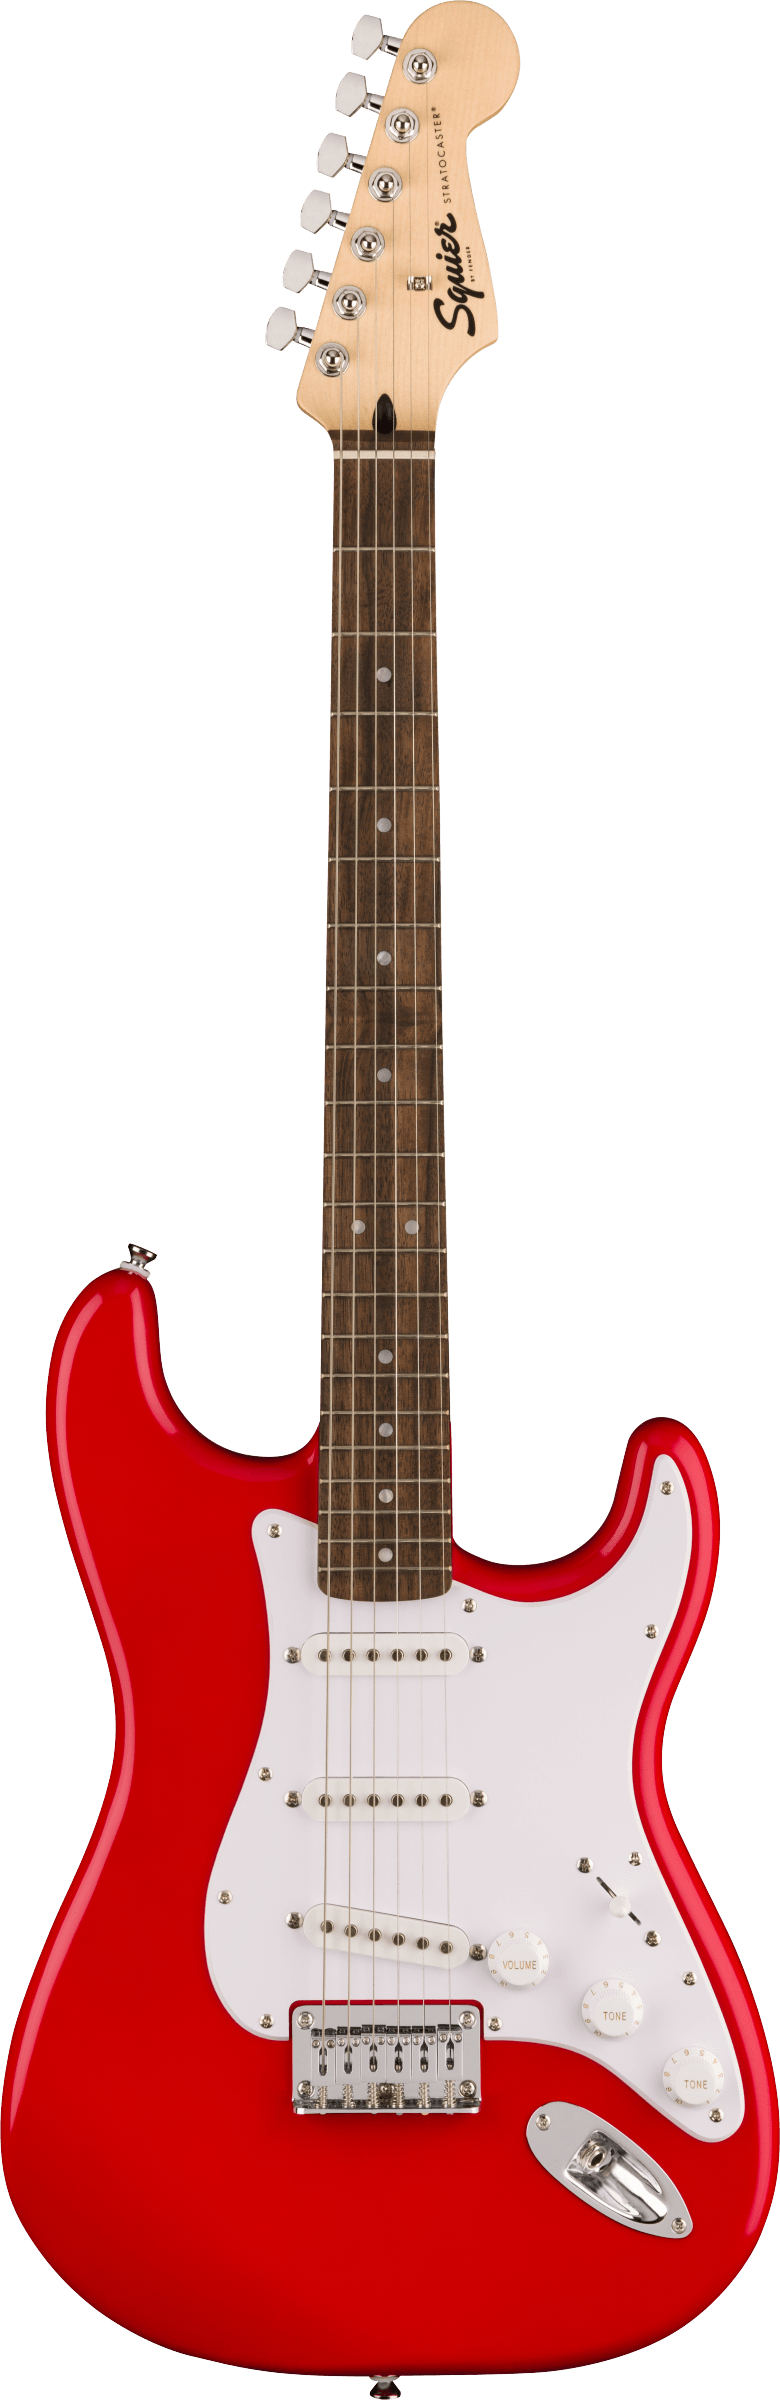 Squier Sonic Stratocaster Hard Tail Torino Red - White Pickguard